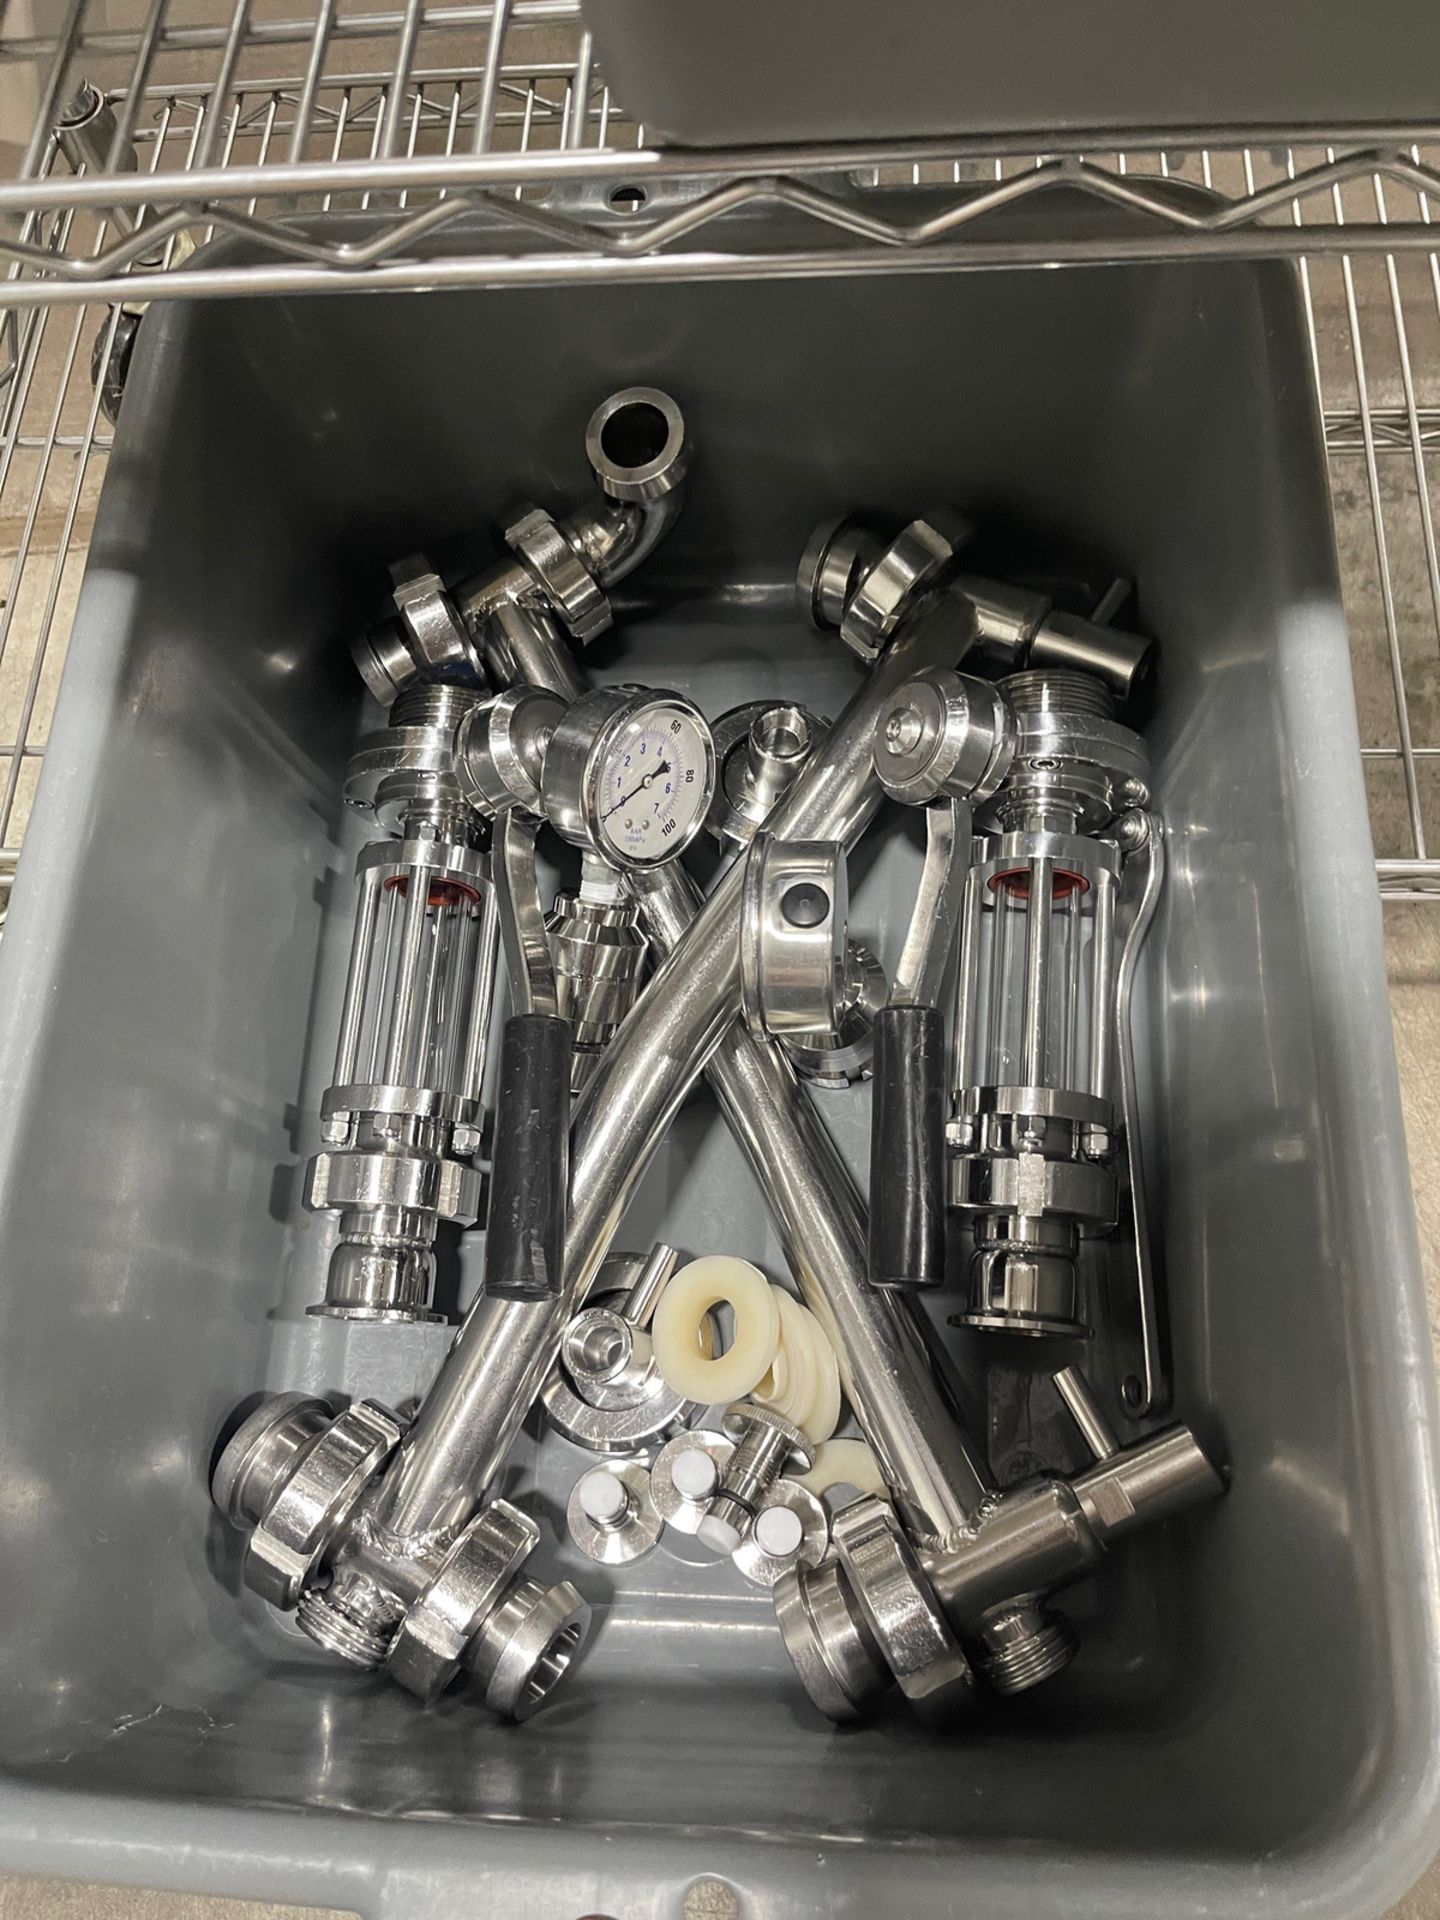 Contents of Rack (Rack Not Included), Stainless Steel Brewing Parts Including | Rig Fee $100 - Image 2 of 7